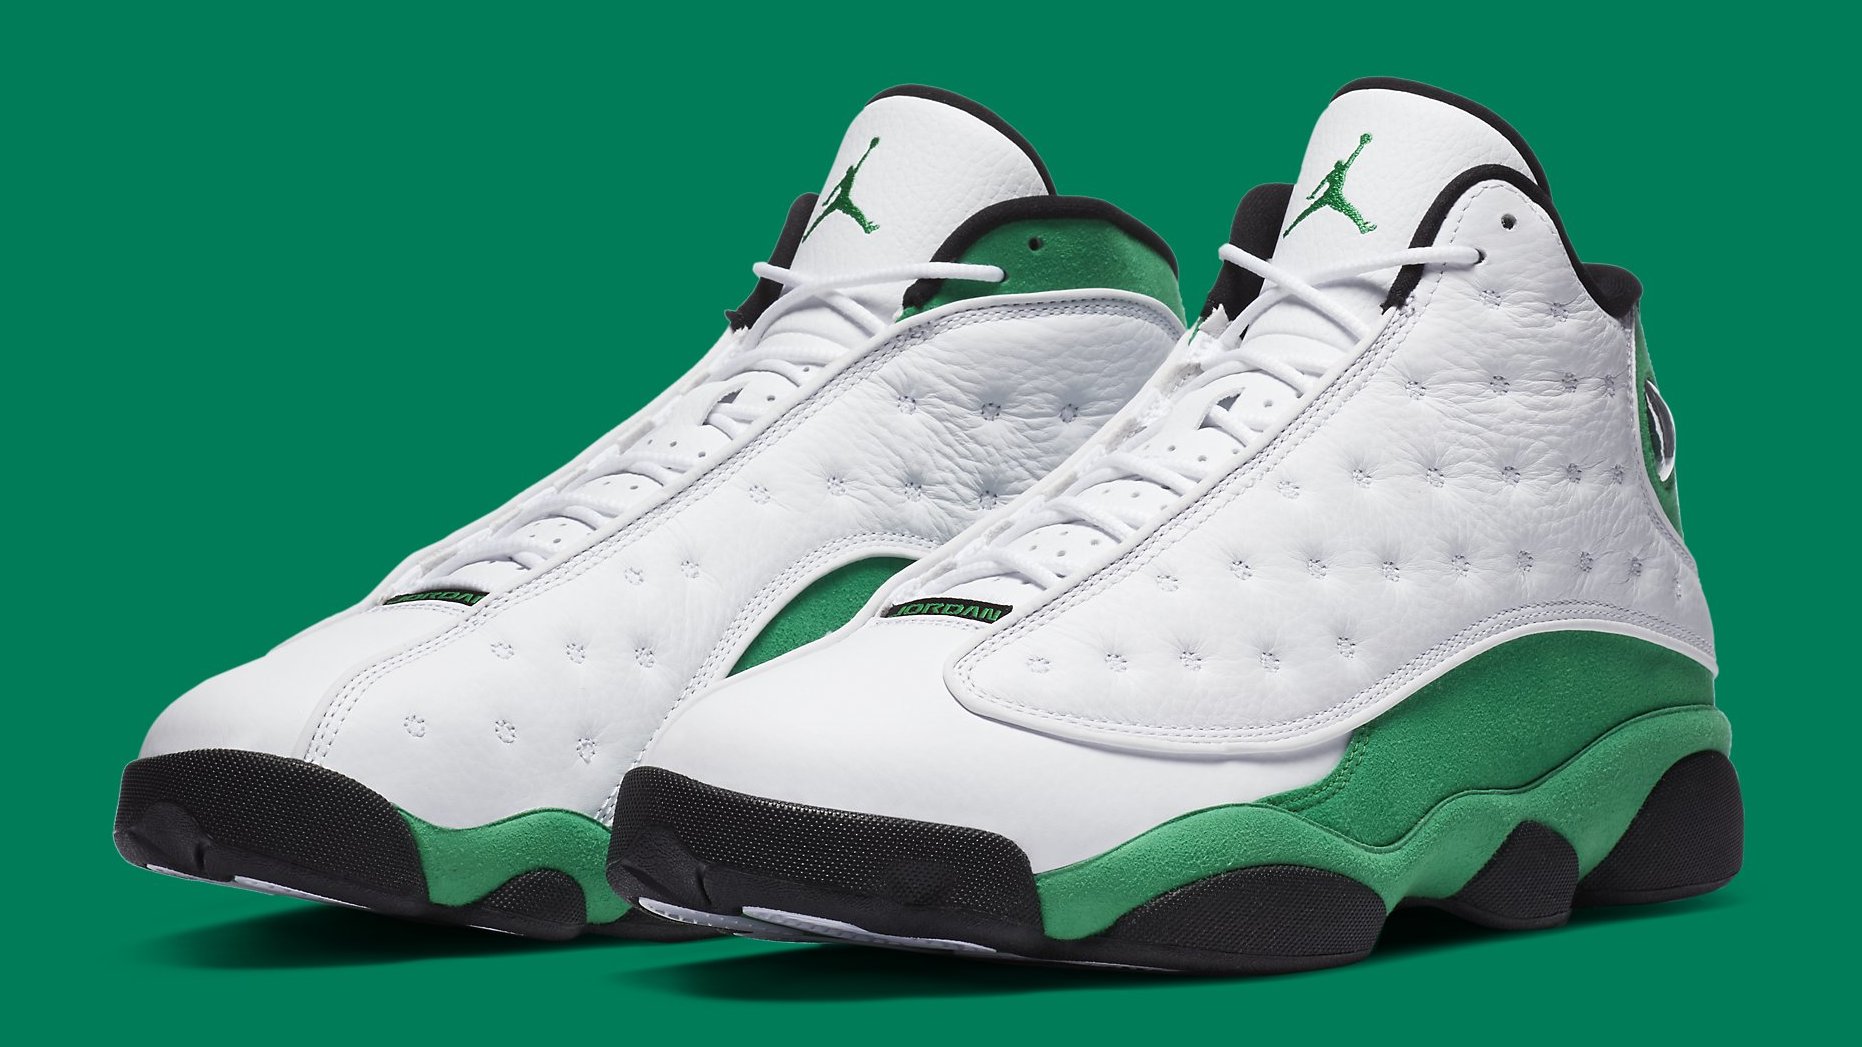 green and white jordans 13 release date